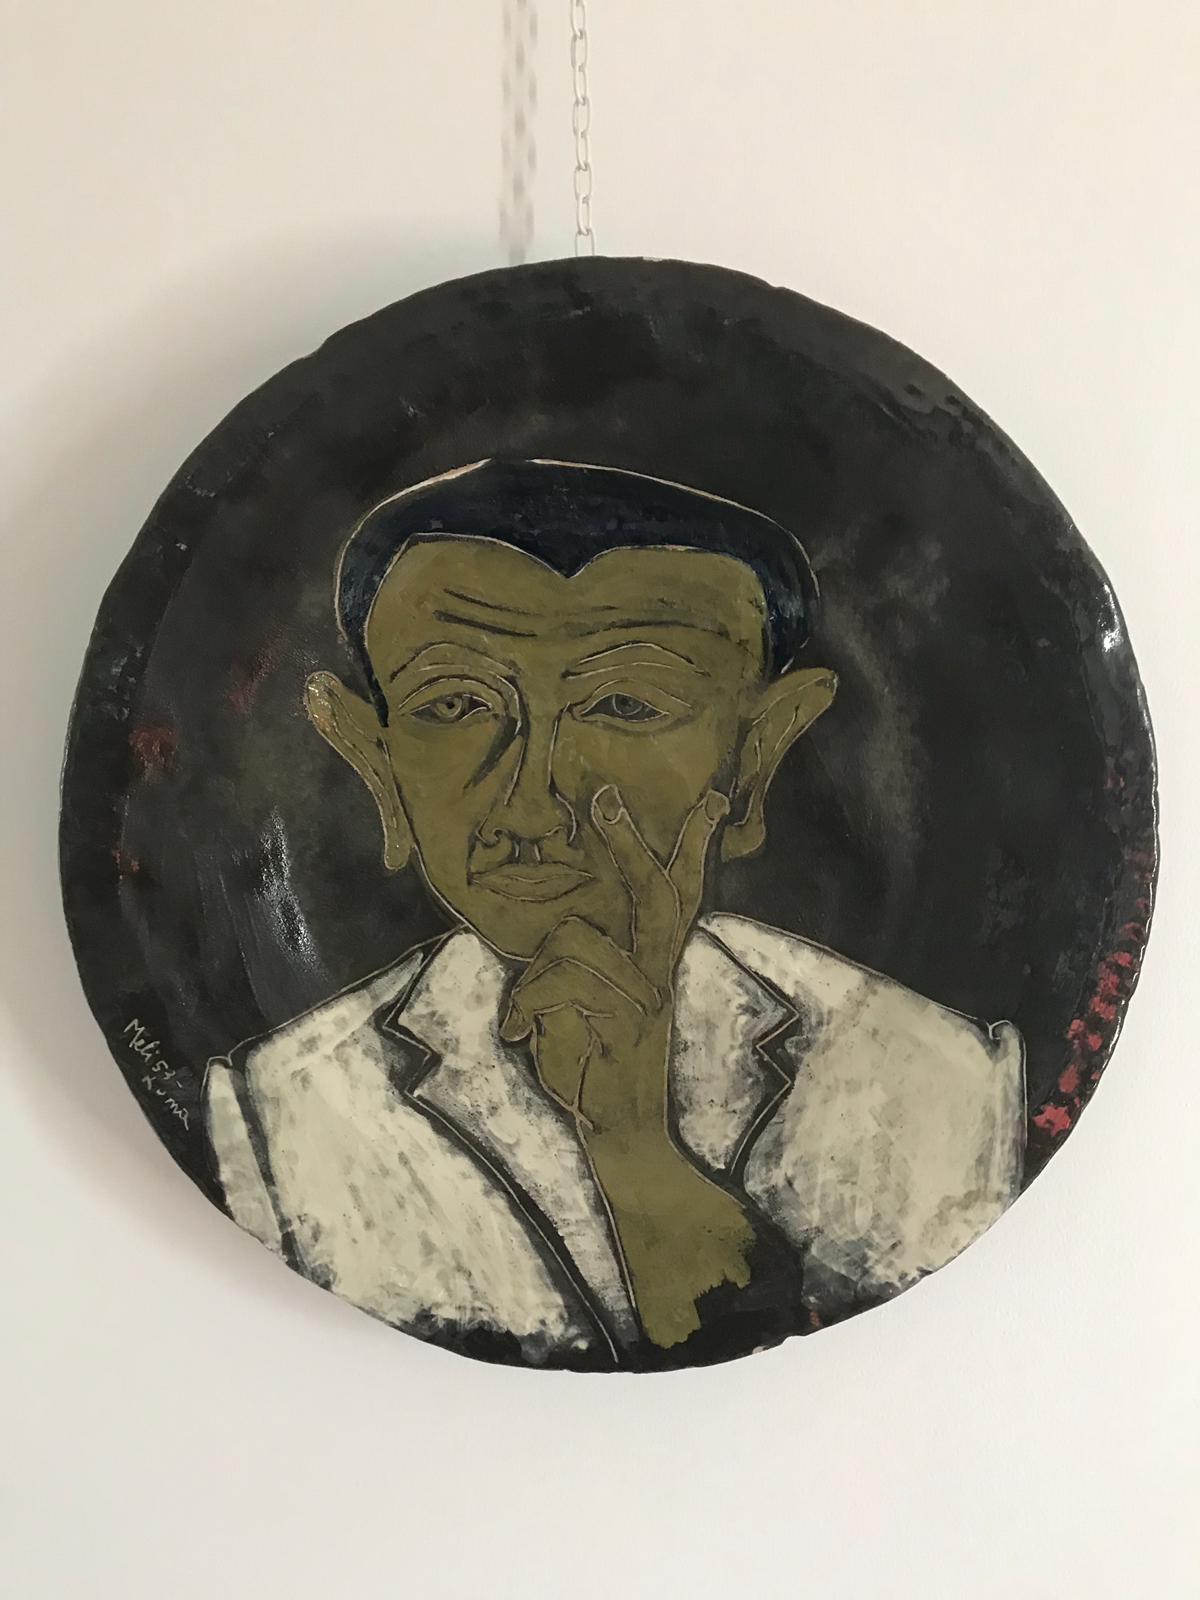 Self-portrait of Salvatore Meli painted on ceramic. 

Salvatore Meli was born in Comiso, in the province of Ragusa, in 1929 where he attended the local School of Art completing his training in Florence, first at the Art Institute of Porta Romana